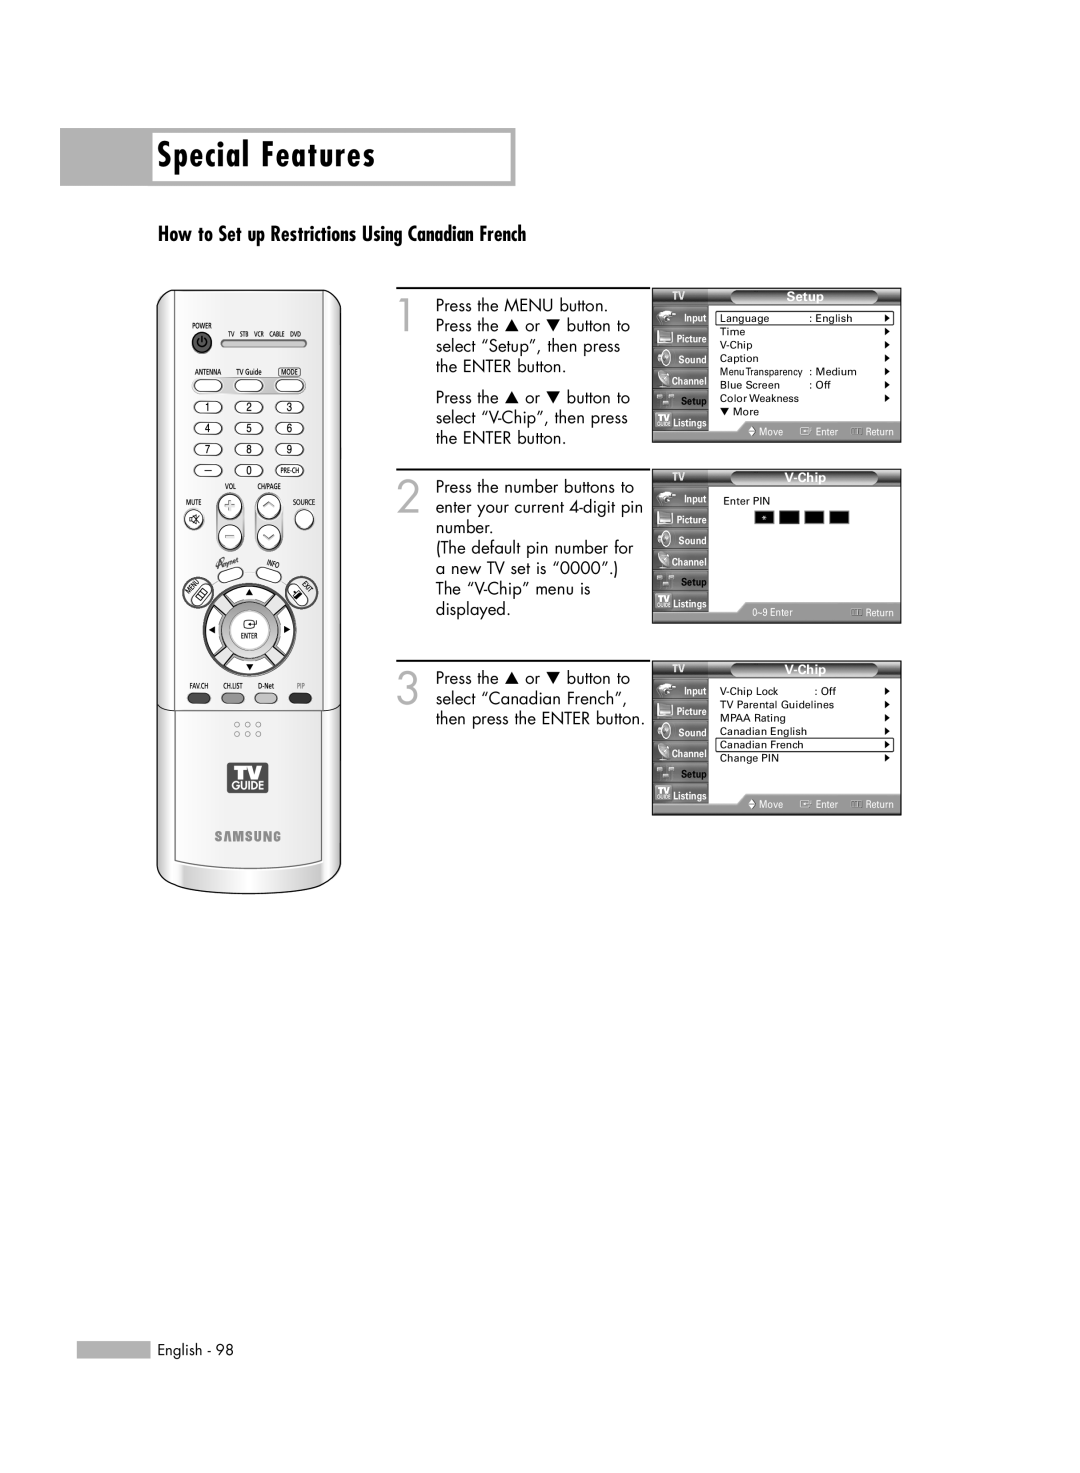 Samsung HL-R7178W, HL-R6178W, HL-R5678W manual Special Features, How to Set up Restrictions Using Canadian French, English 